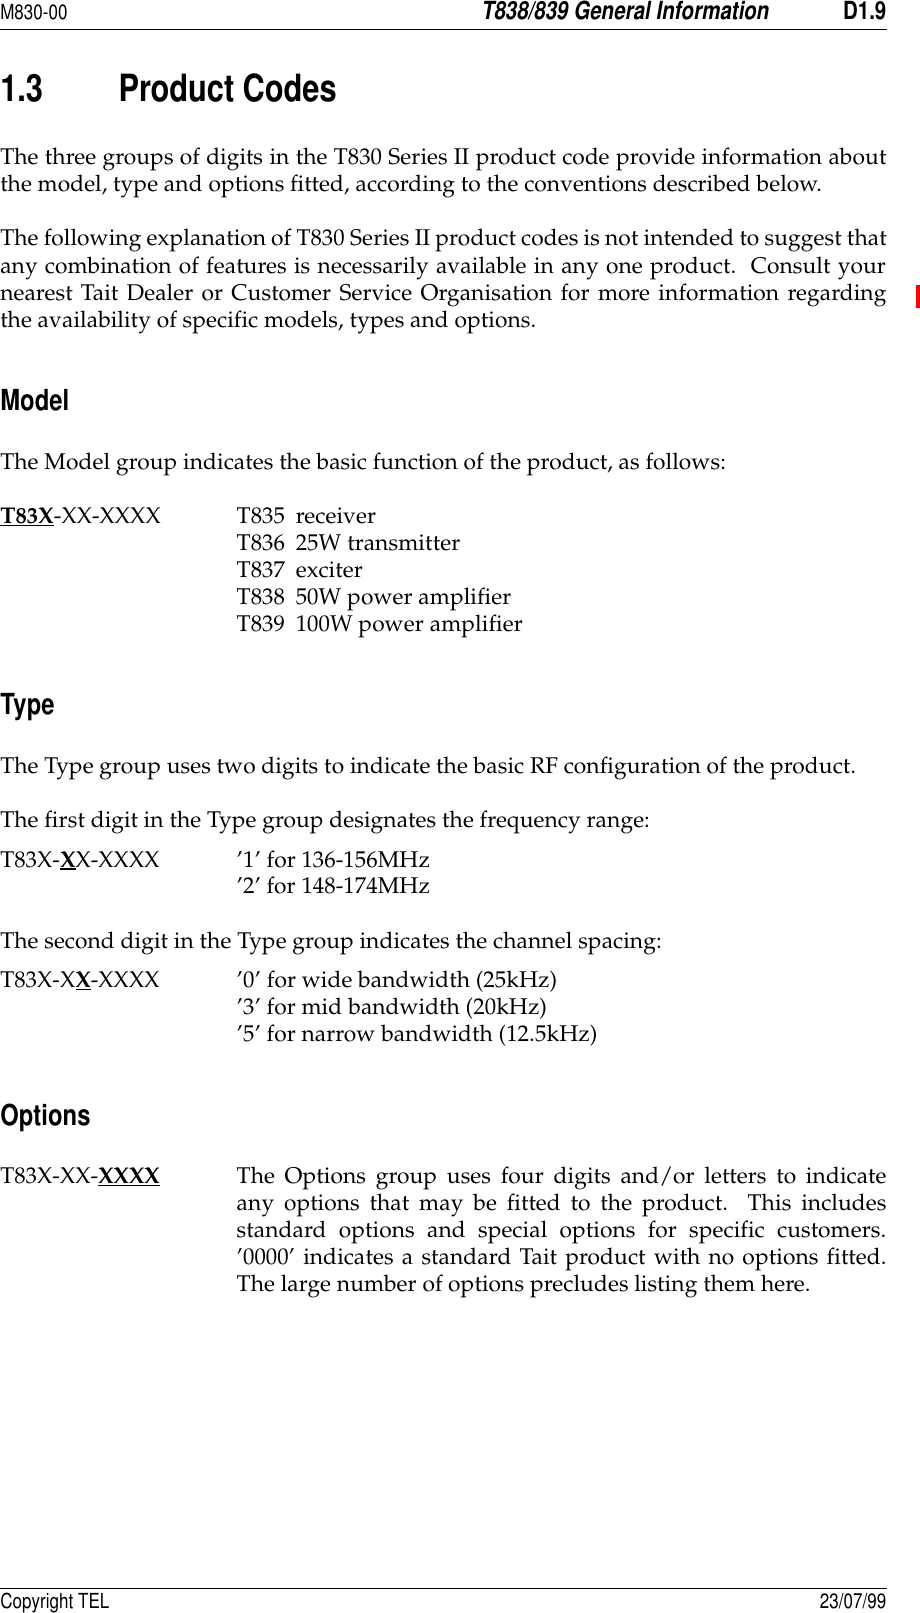 M830-00T838/839 General InformationD1.9Copyright TEL 23/07/991.3 Product CodesThe three groups of digits in the T830 Series II product code provide information aboutthe model, type and options fitted, according to the conventions described below.The following explanation of T830 Series II product codes is not intended to suggest thatany combination of features is necessarily available in any one product.  Consult yournearest Tait Dealer or Customer Service Organisation for more information regardingthe availability of specific models, types and options.ModelThe Model group indicates the basic function of the product, as follows:T83X-XX-XXXX T835 receiverT836 25W transmitterT837 exciterT838 50W power amplifierT839 100W power amplifierTypeThe Type group uses two digits to indicate the basic RF configuration of the product.The first digit in the Type group designates the frequency range:T83X-XX-XXXX ’1’ for 136-156MHz’2’ for 148-174MHzThe second digit in the Type group indicates the channel spacing:T83X-XX-XXXX ’0’ for wide bandwidth (25kHz)’3’ for mid bandwidth (20kHz)’5’ for narrow bandwidth (12.5kHz)OptionsT83X-XX-XXXX The Options group uses four digits and/or letters to indicateany options that may be fitted to the product.  This includesstandard options and special options for specific customers.’0000’ indicates a standard Tait product with no options fitted.The large number of options precludes listing them here.